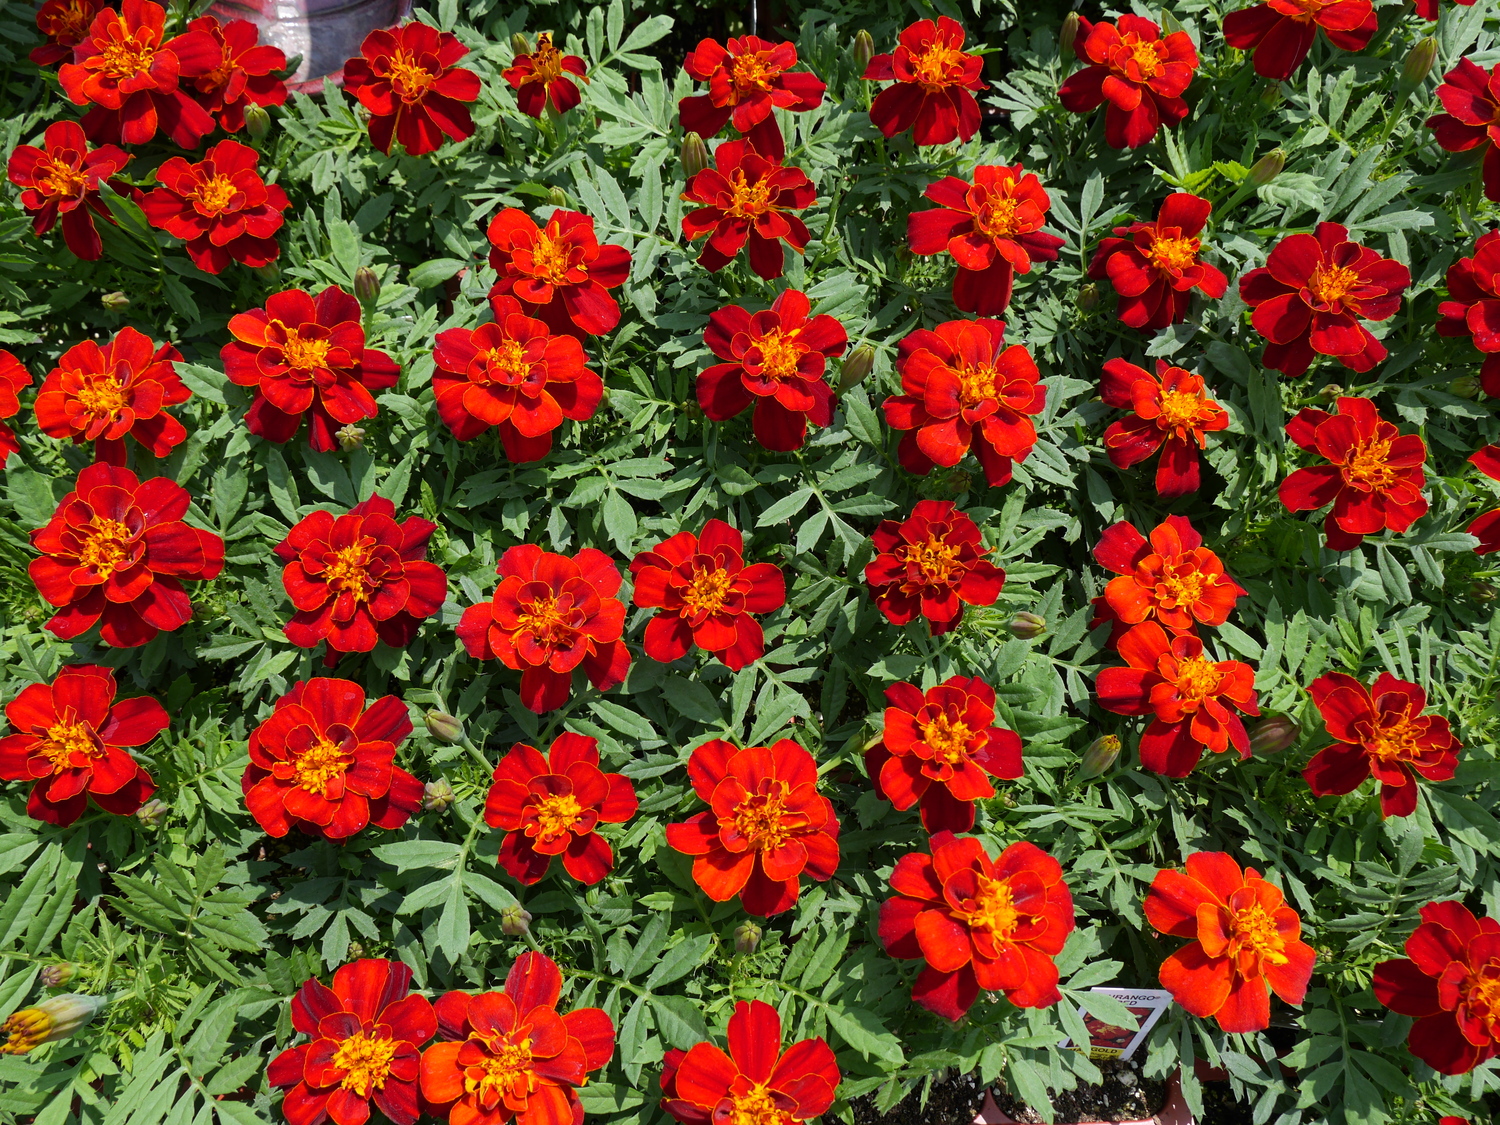 These mahogany and gold marigolds are bedding types that are available in heights from 8 to 12 inches. Most are good for pollinators, but watch for spider mites on the foliage when the summer gets hot and dry. ANDREW MESSINGER